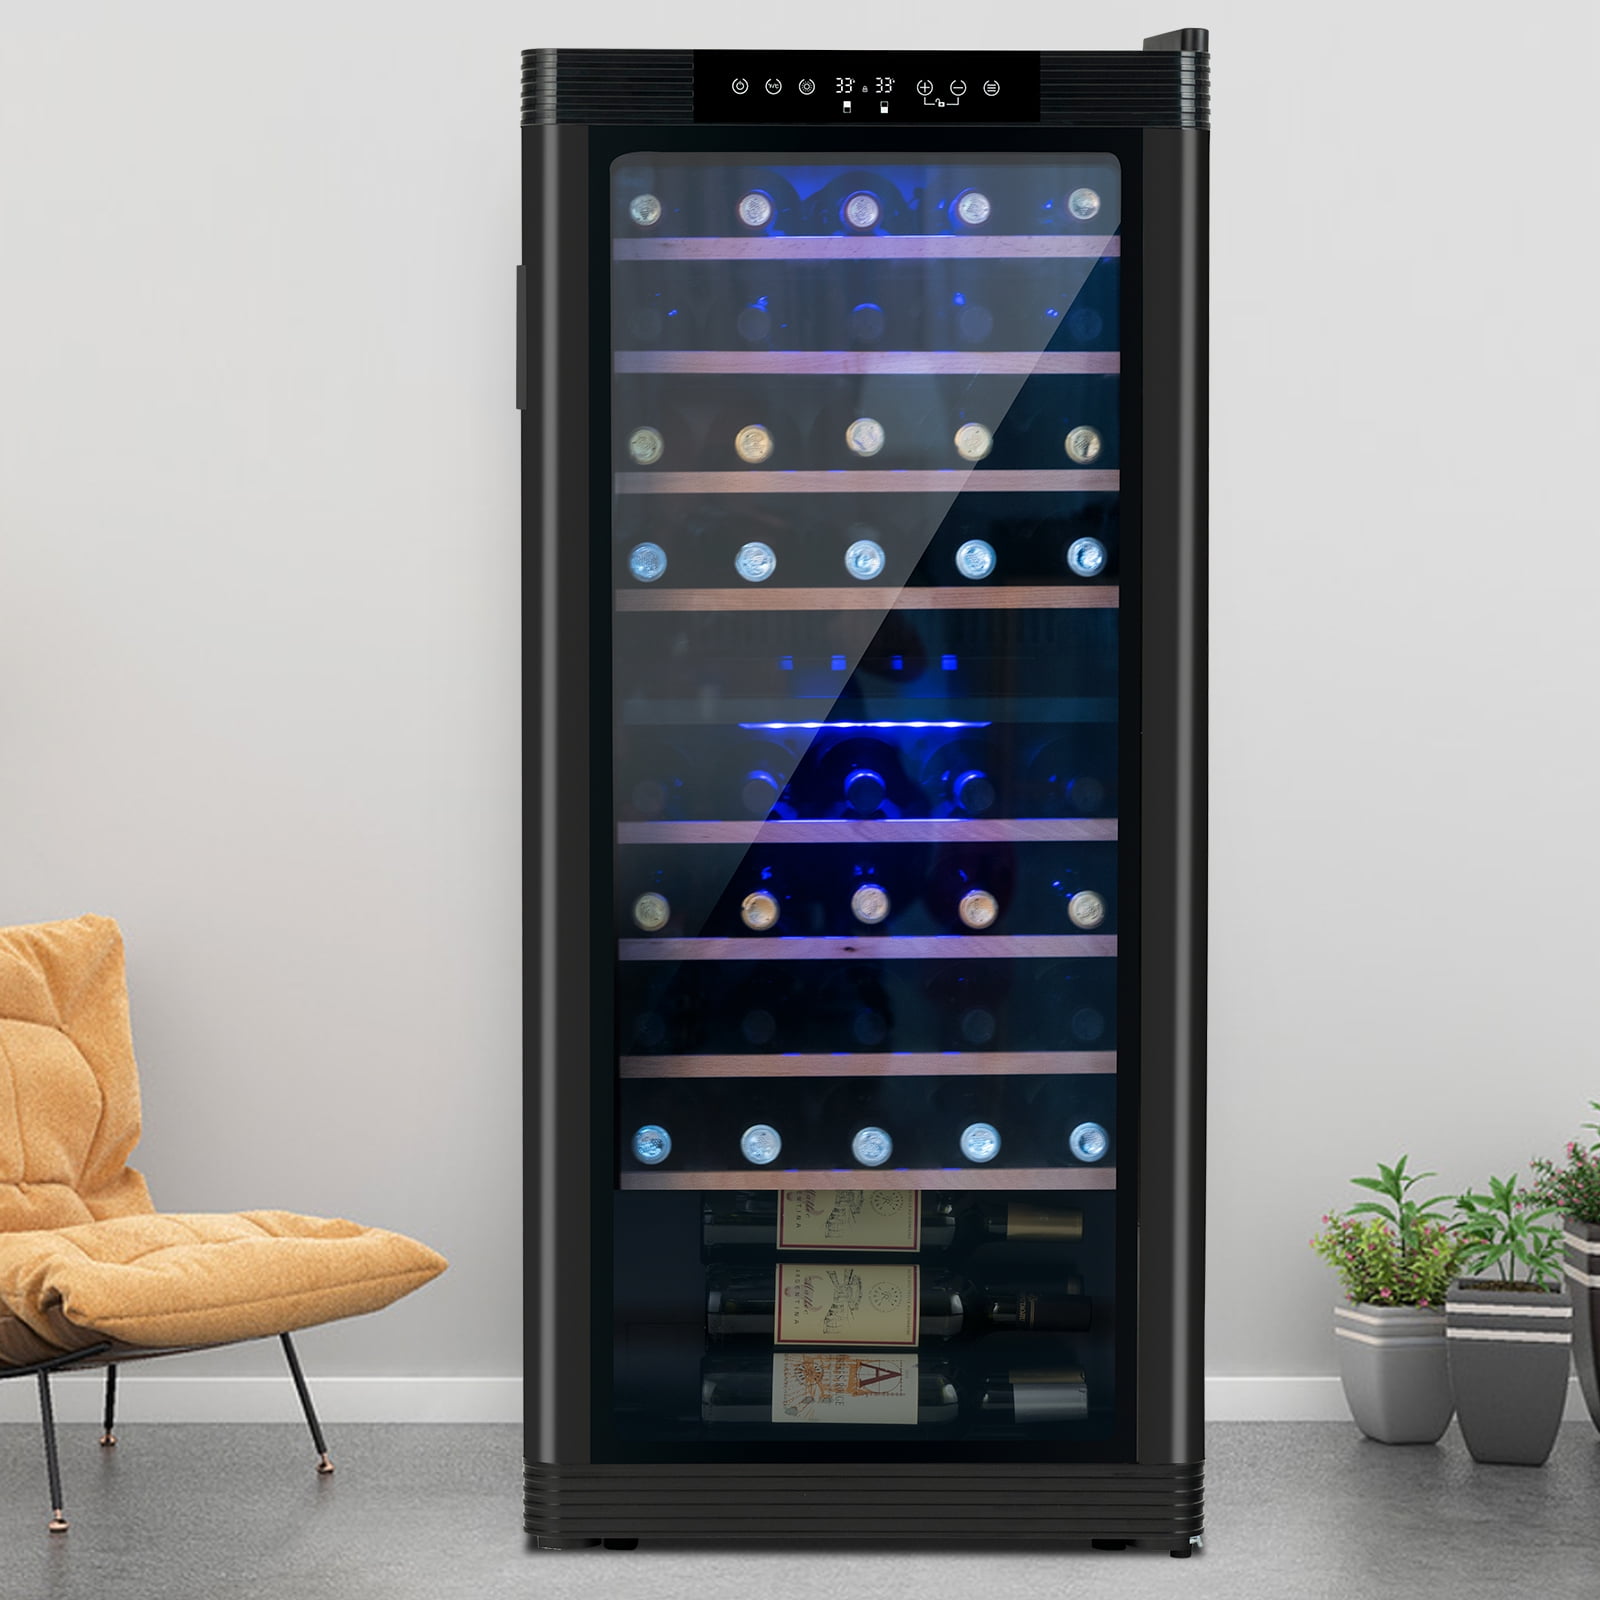 KENWELL 48 Bottles Compressor Dual Zone Freestanding Wine Cooler Refrigerator/Chiller-Red/White Wine Beer and Champagne Wine Cellar-Digital Temperature Display-Double-layer Glass Door-Quiet Operation 